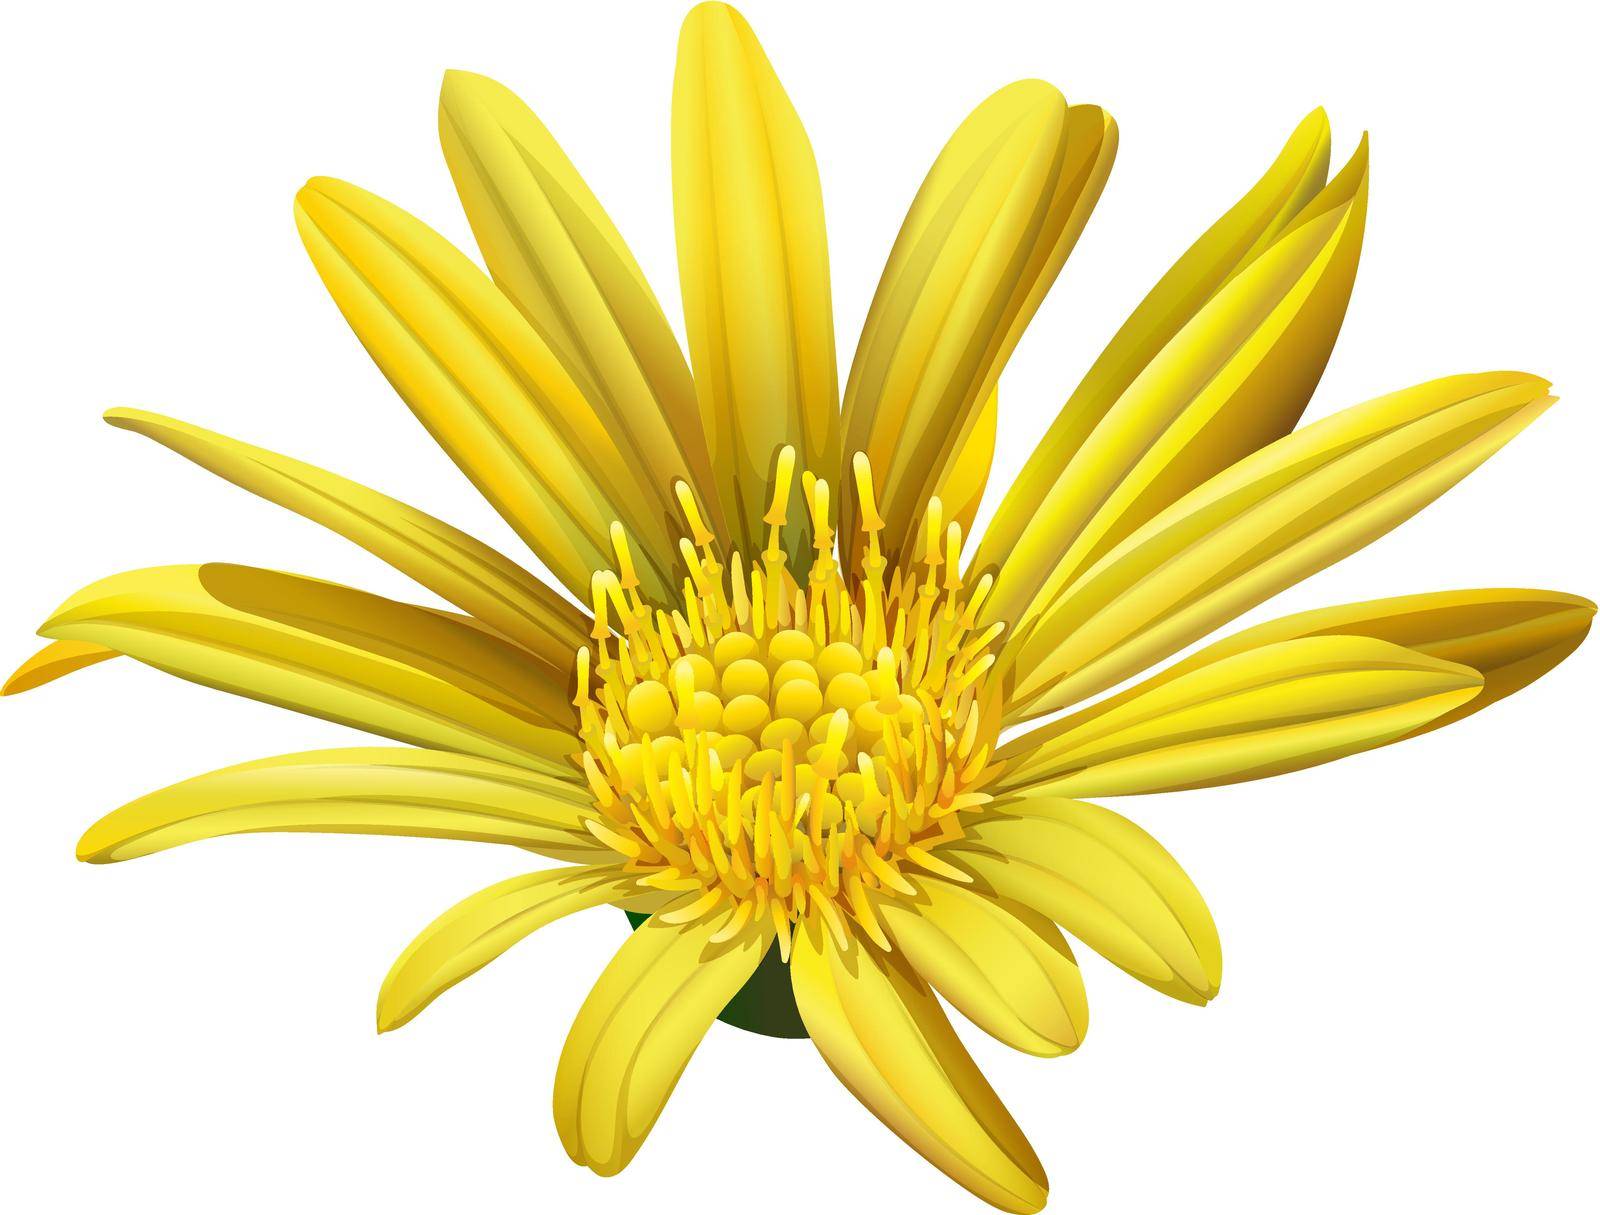 A yellow sunflower on a white background